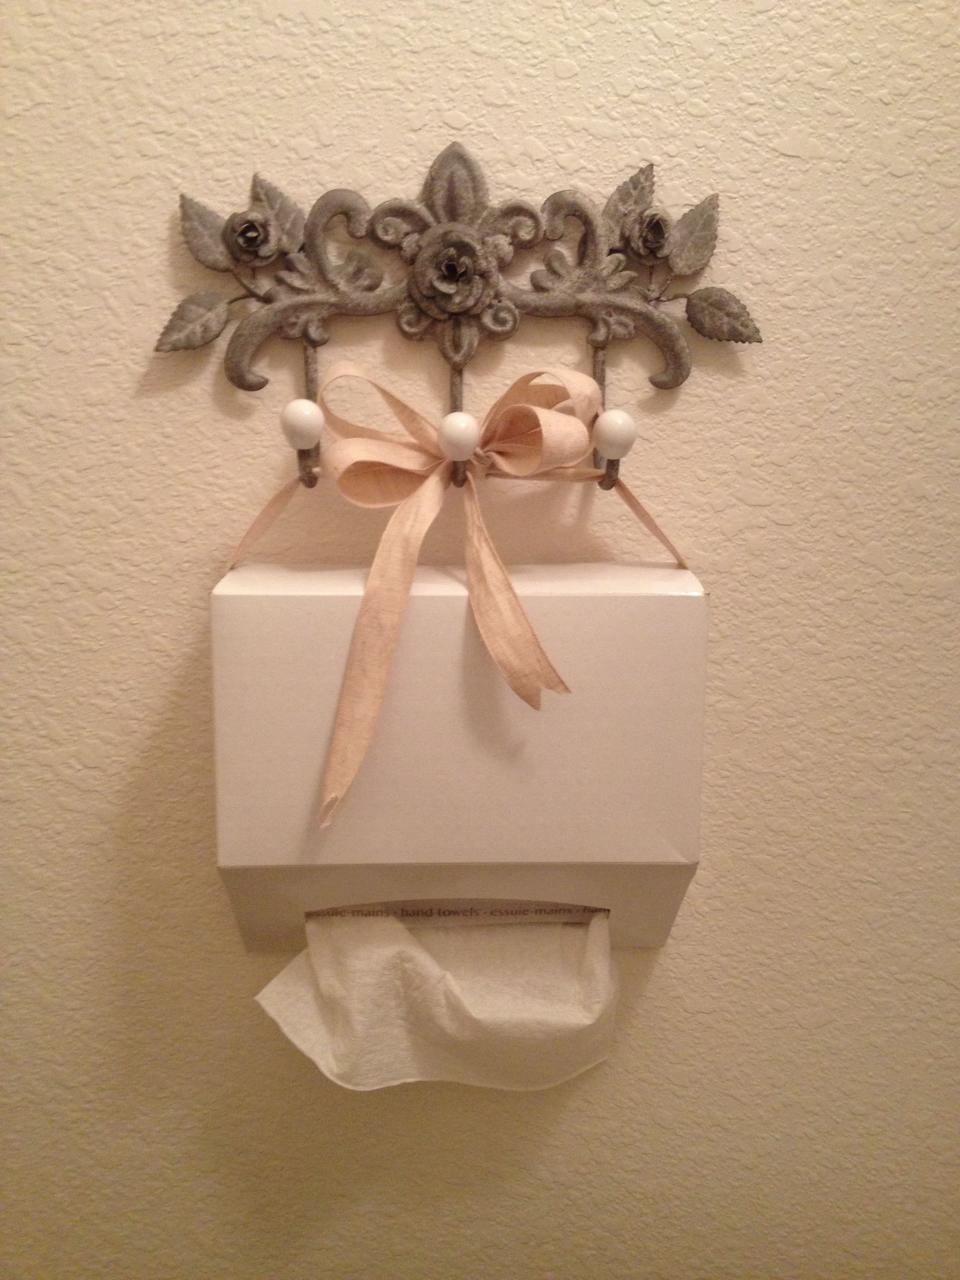 A pretty way to hang paper towels in the bathroom! Bath decor